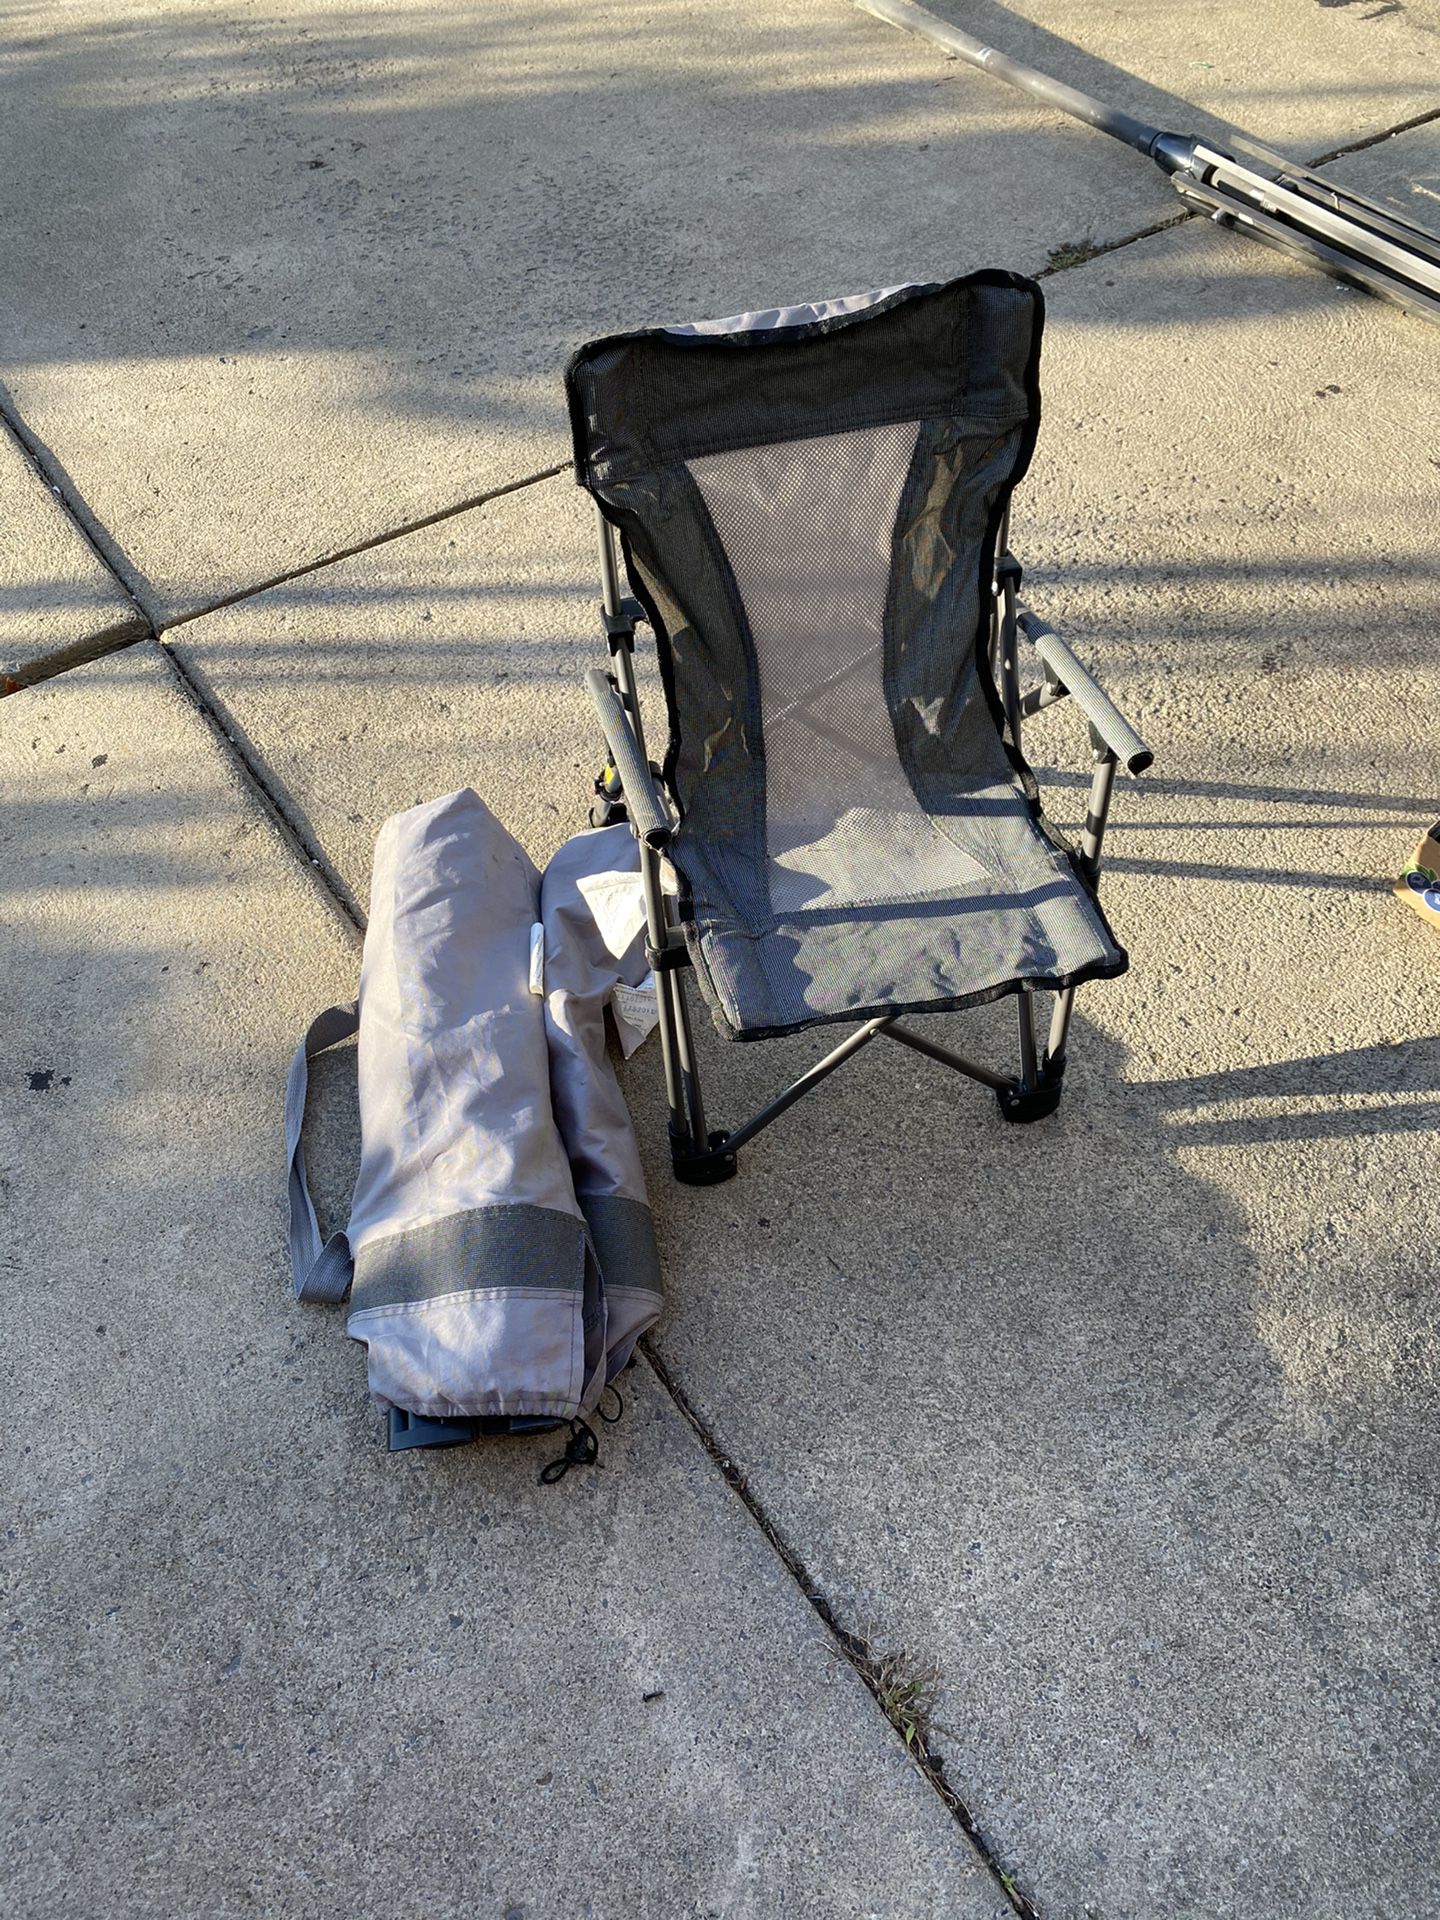 Small folding/locking kids chairs. 2 of them. Outdoor with bag.